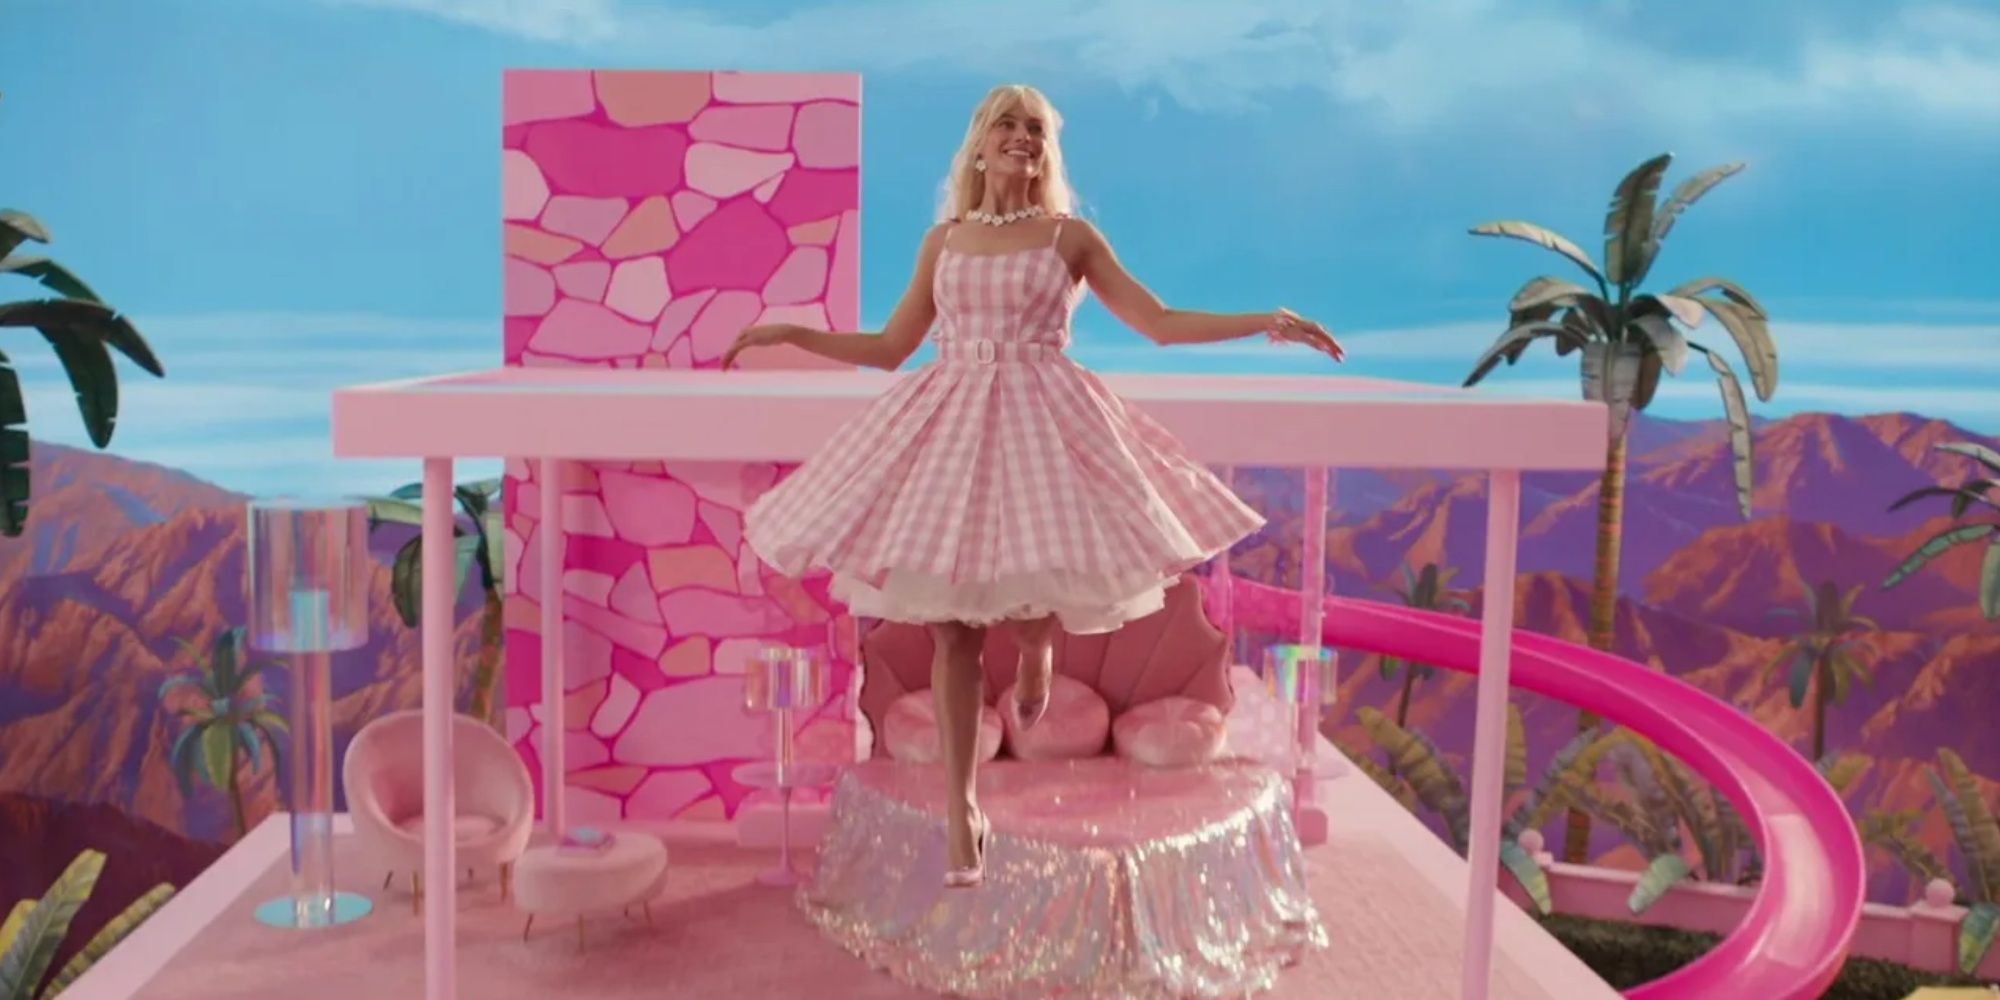 margot robbie as barbie floating out of her dream house